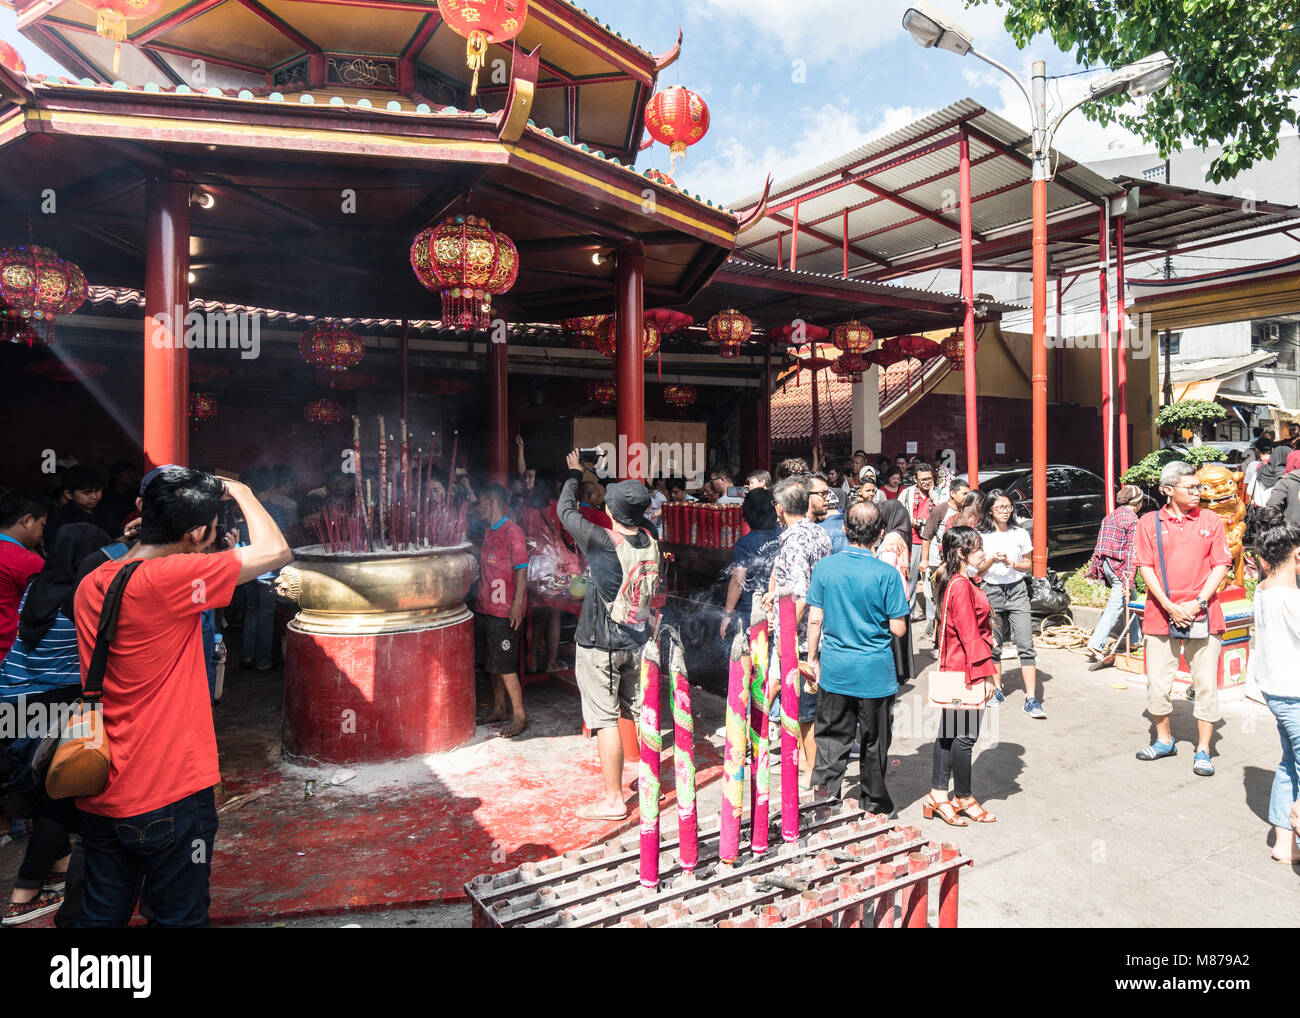 Jakarta, Indonesia - February 16 2018: People celebrate Chinese new year in the Jin De Yuan temple in Glodok, Jakarta Chinatown. The city hold a signi Stock Photo